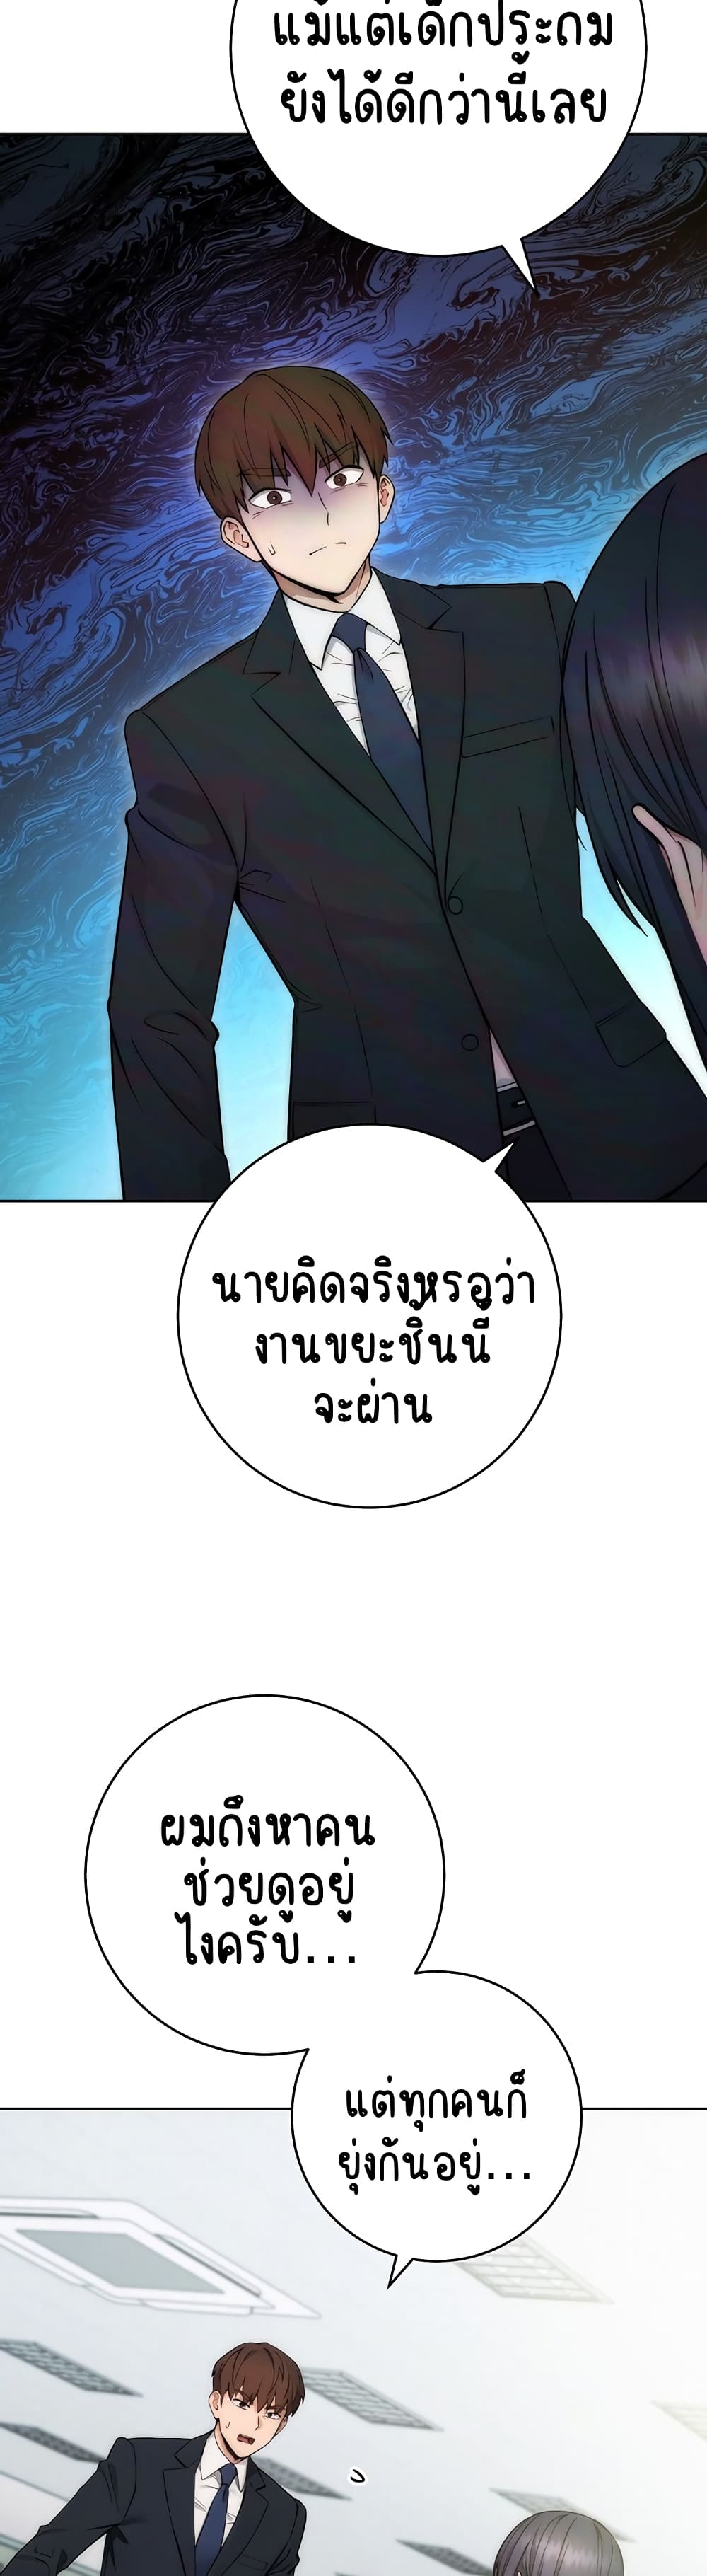 Outsider: The Invisible Man ตอนที่ 1 ภาพ 21